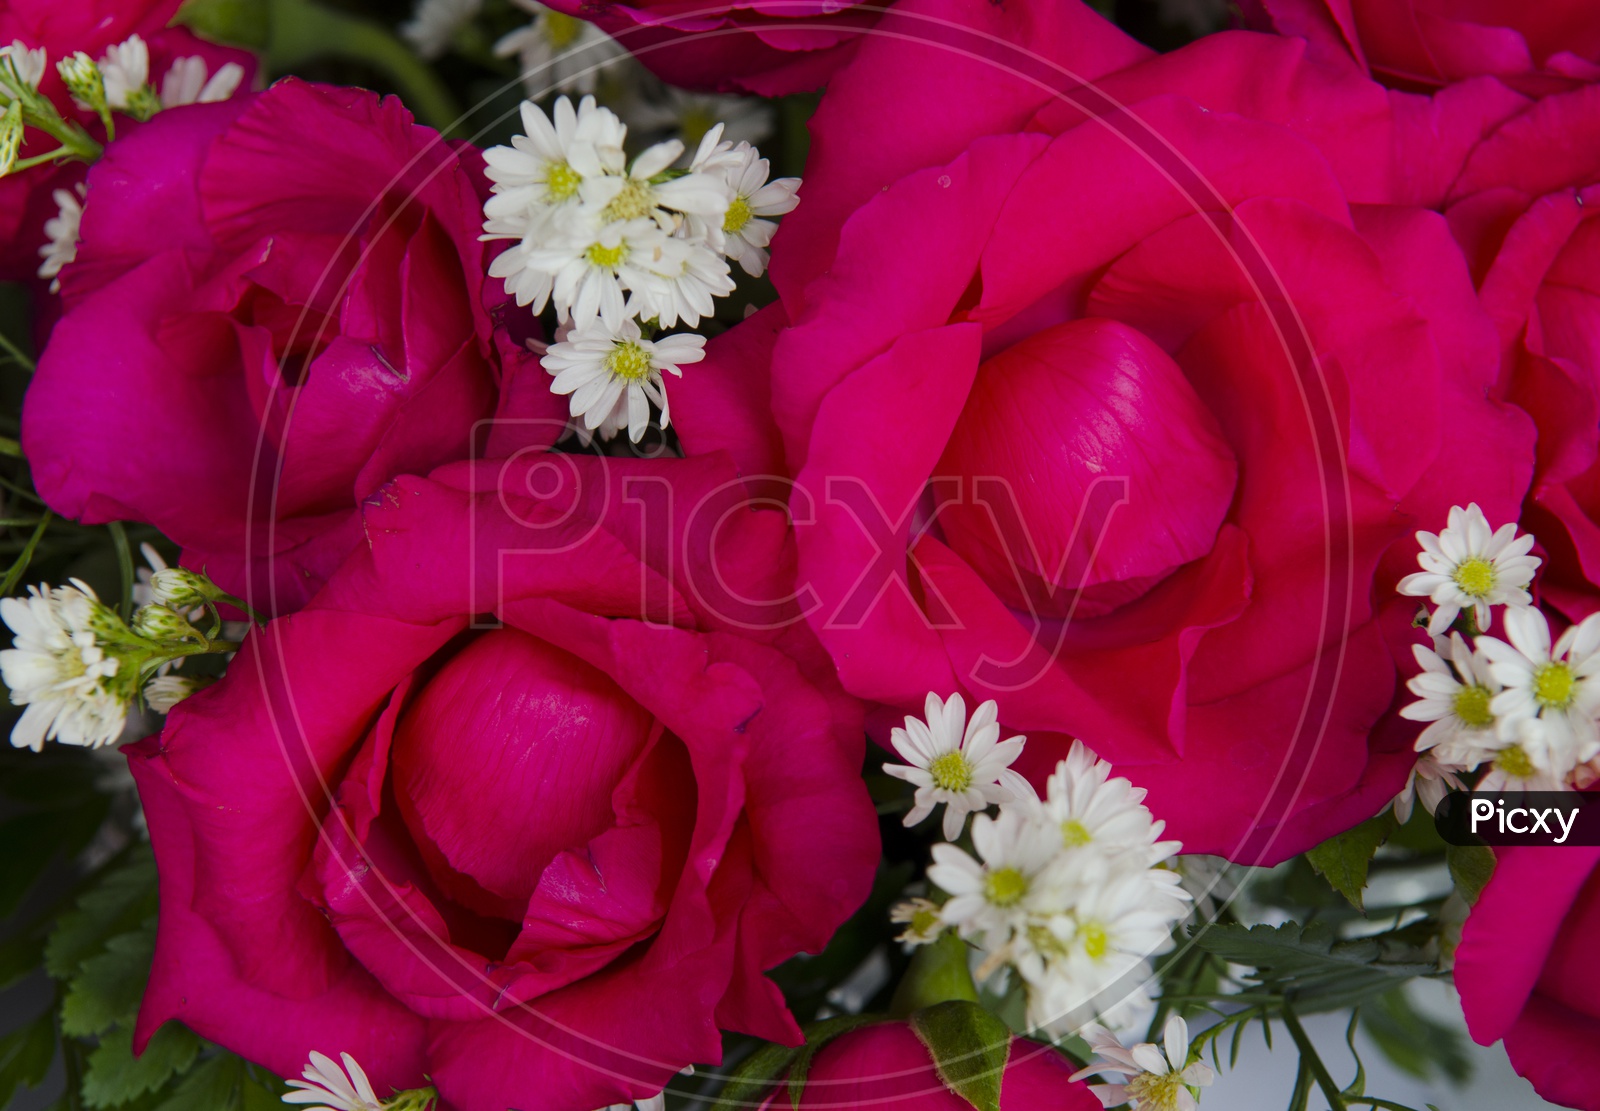 Red roses And White  Chrysanthemum Flowers Bouquet